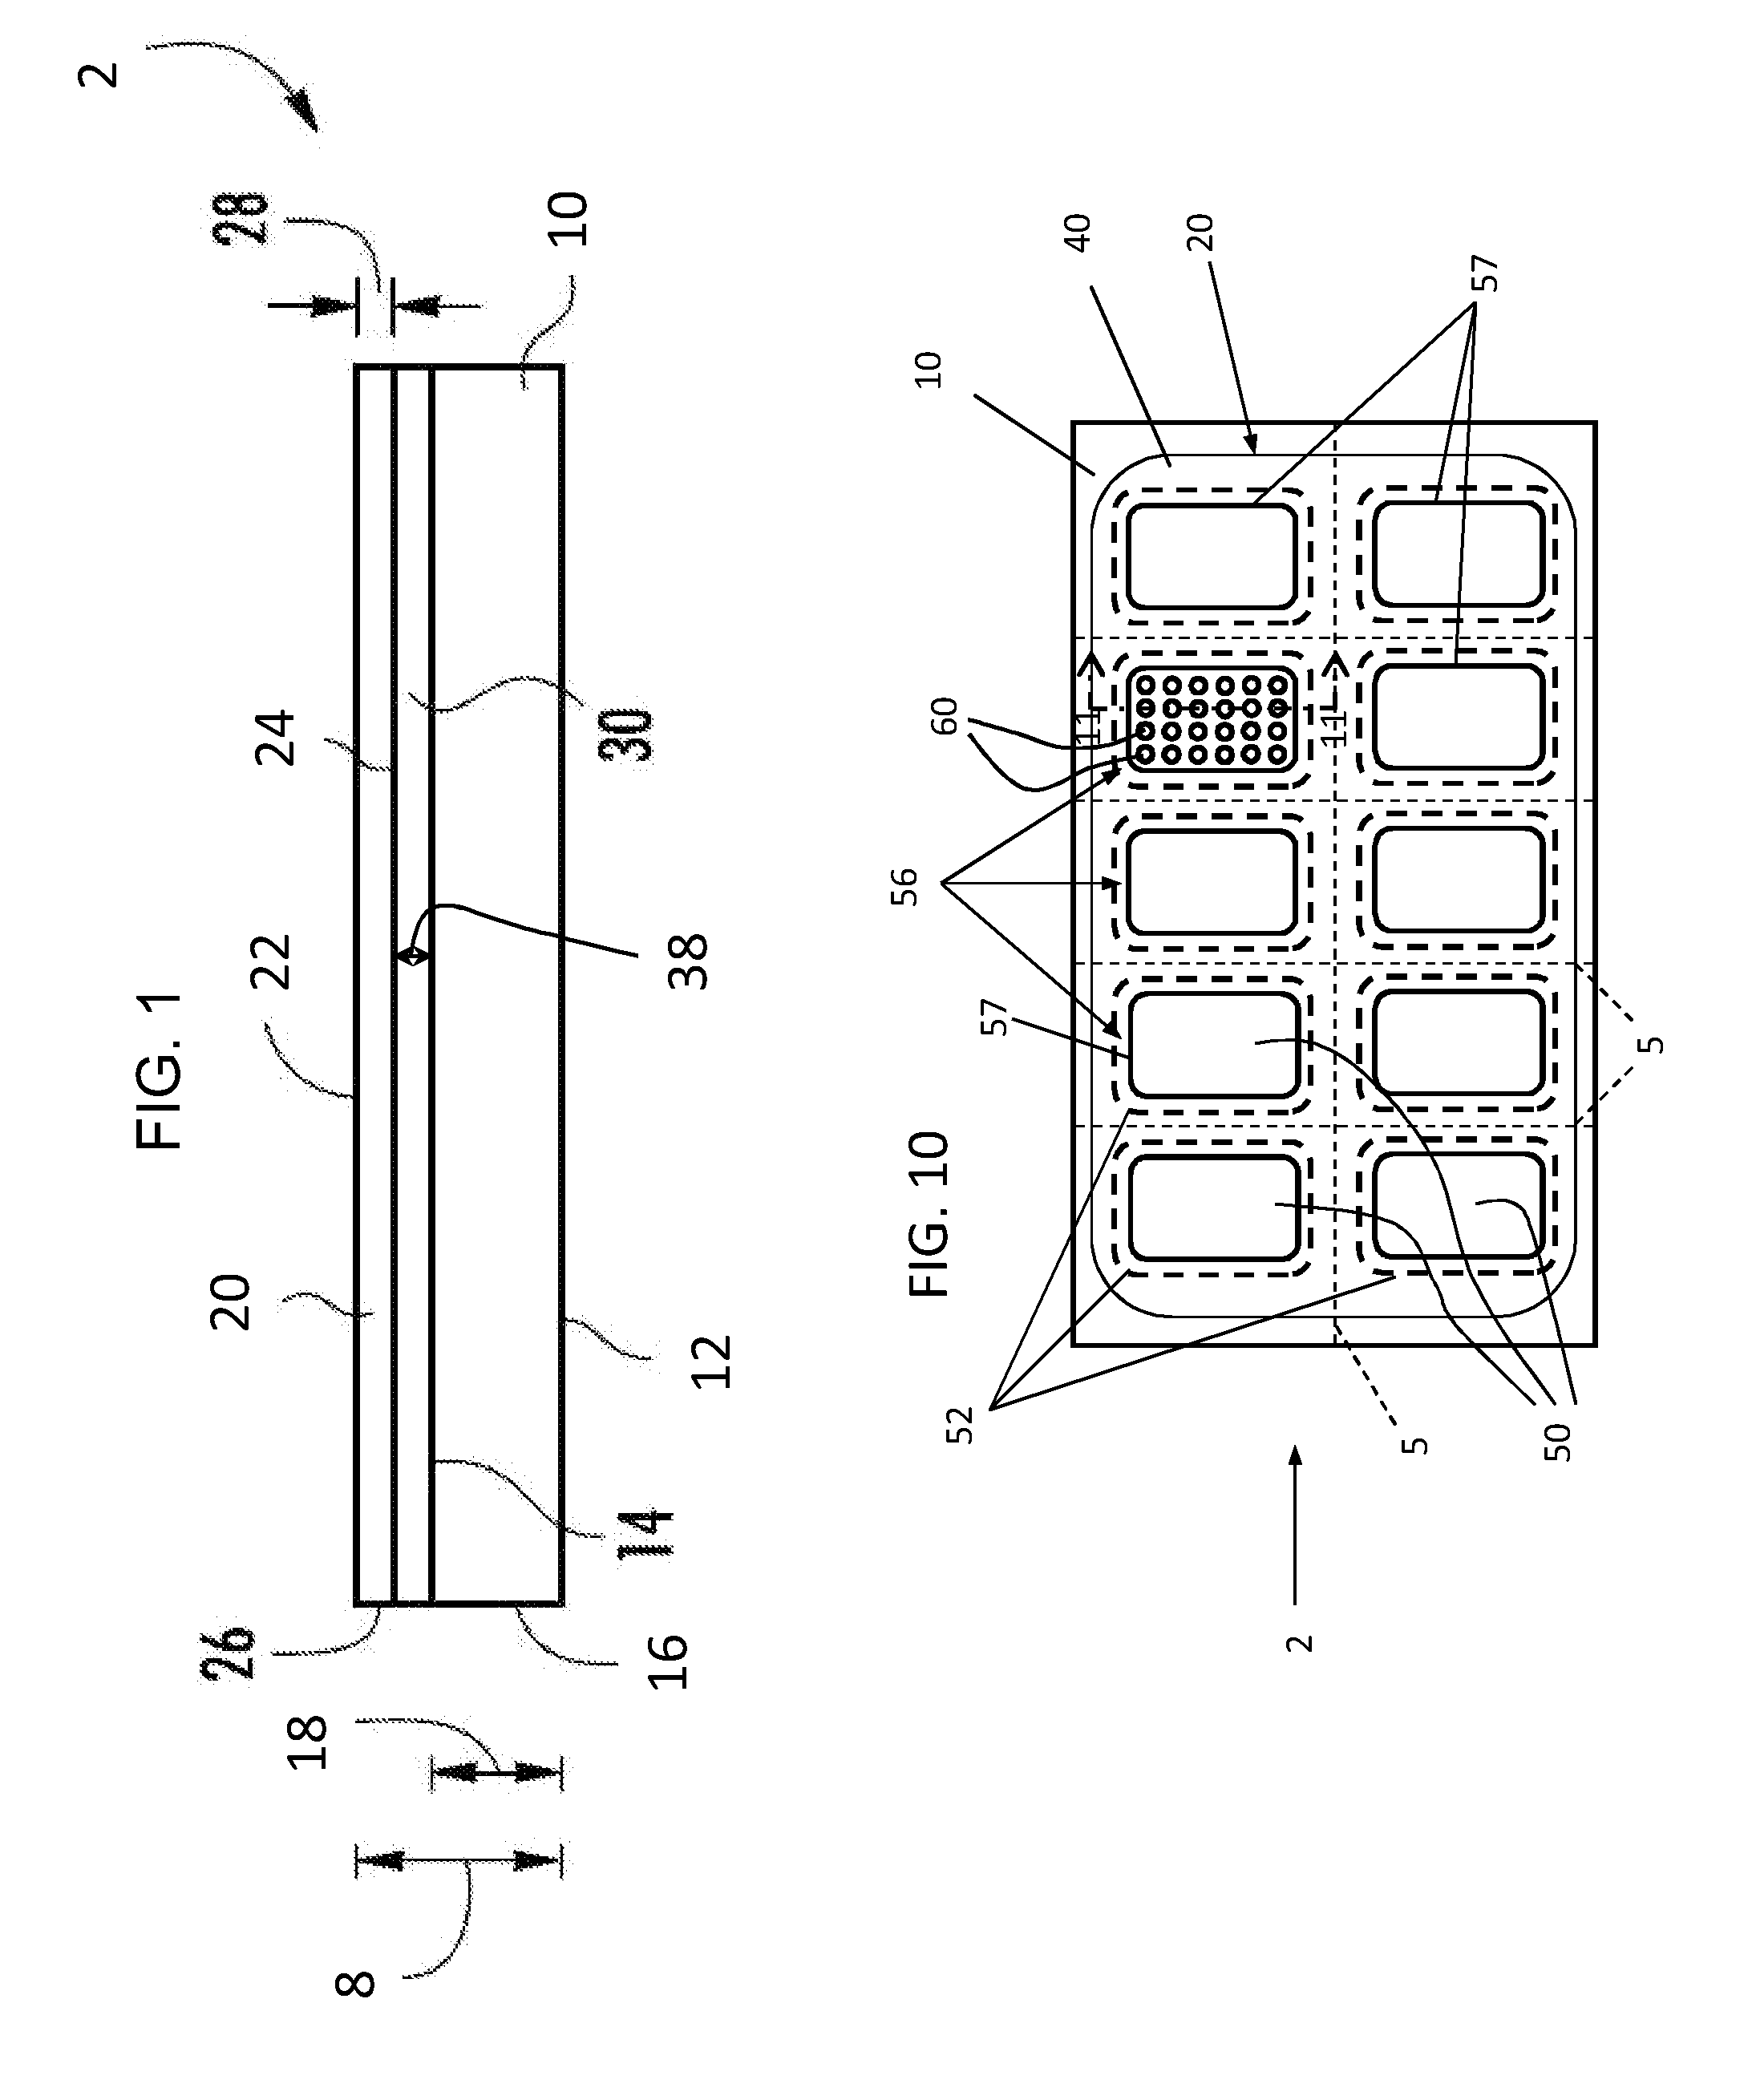 Carrier-bonding methods and articles for semiconductor and interposer processing